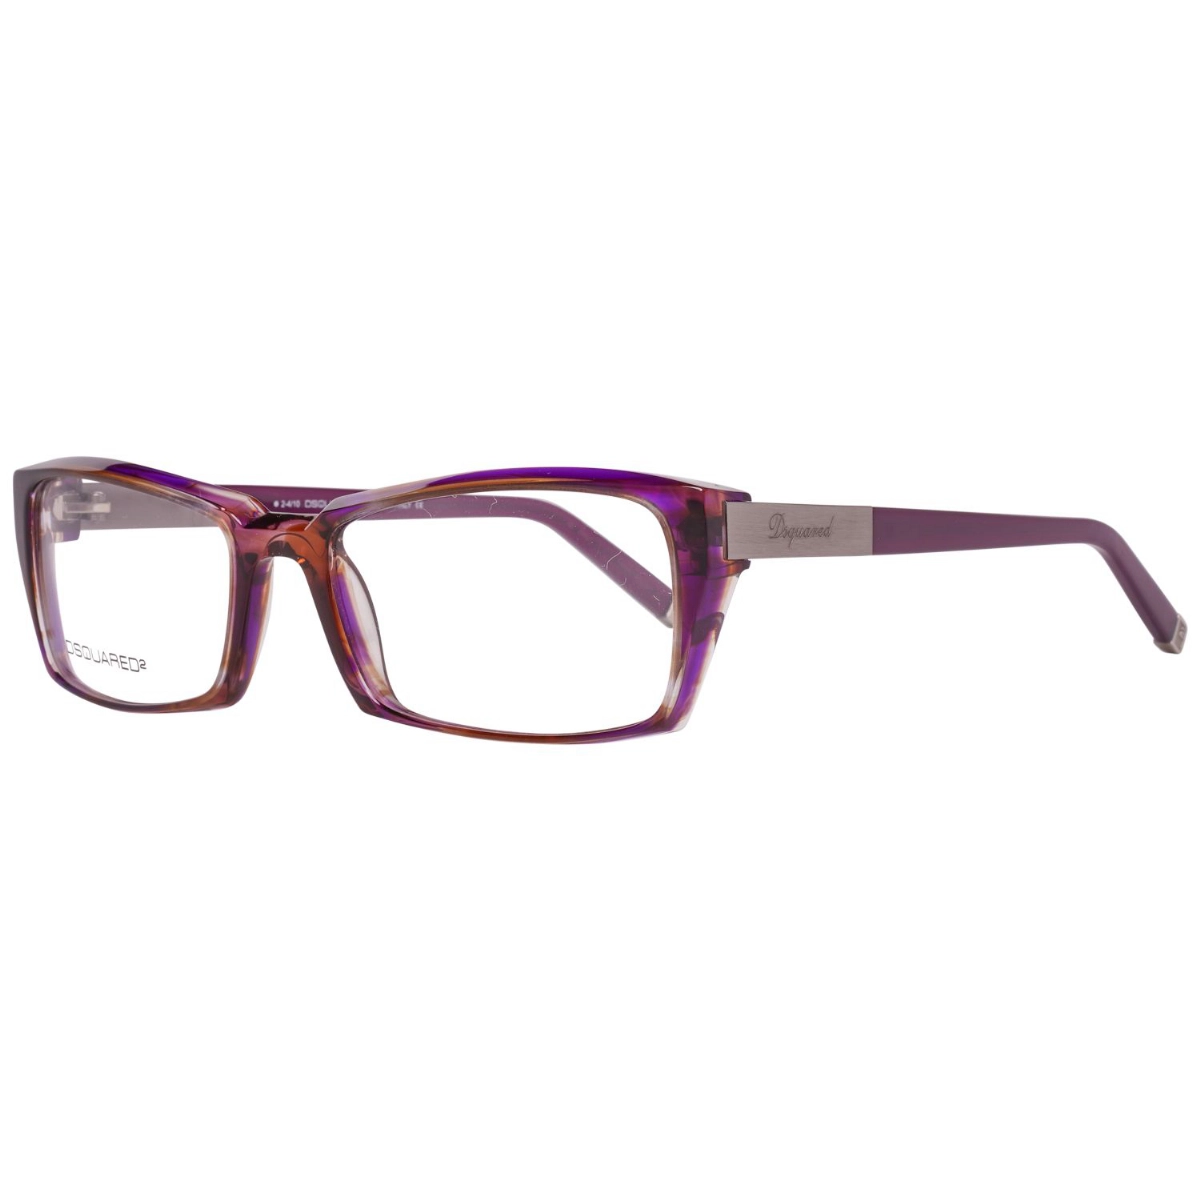 GLASSES FOR WOMAN DSQUARED2 DQ5046-050-54